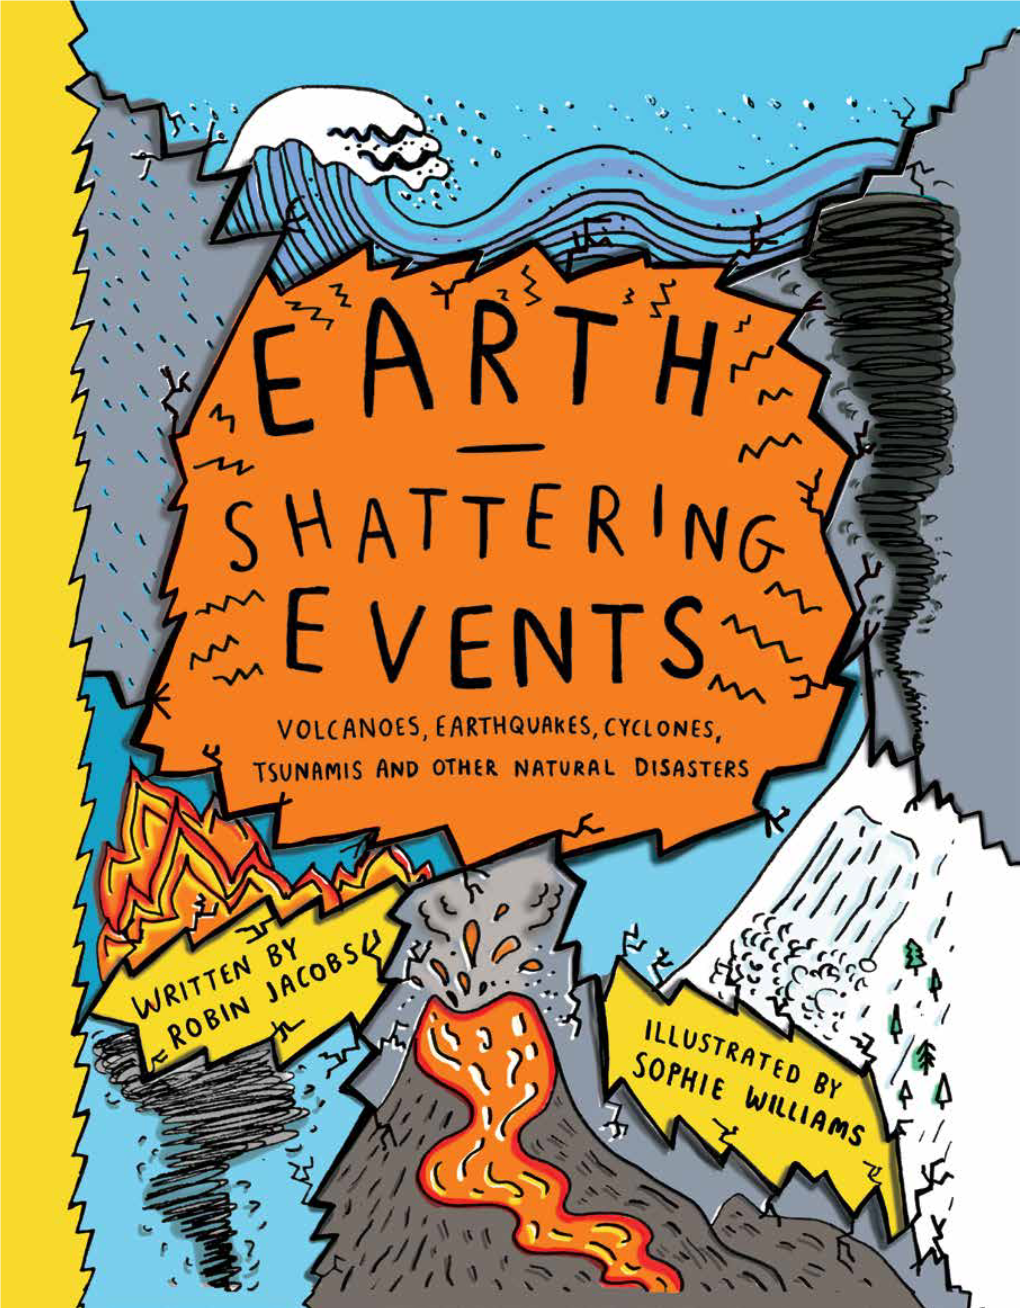 Earth-Shattering Events by Robin Jacobs